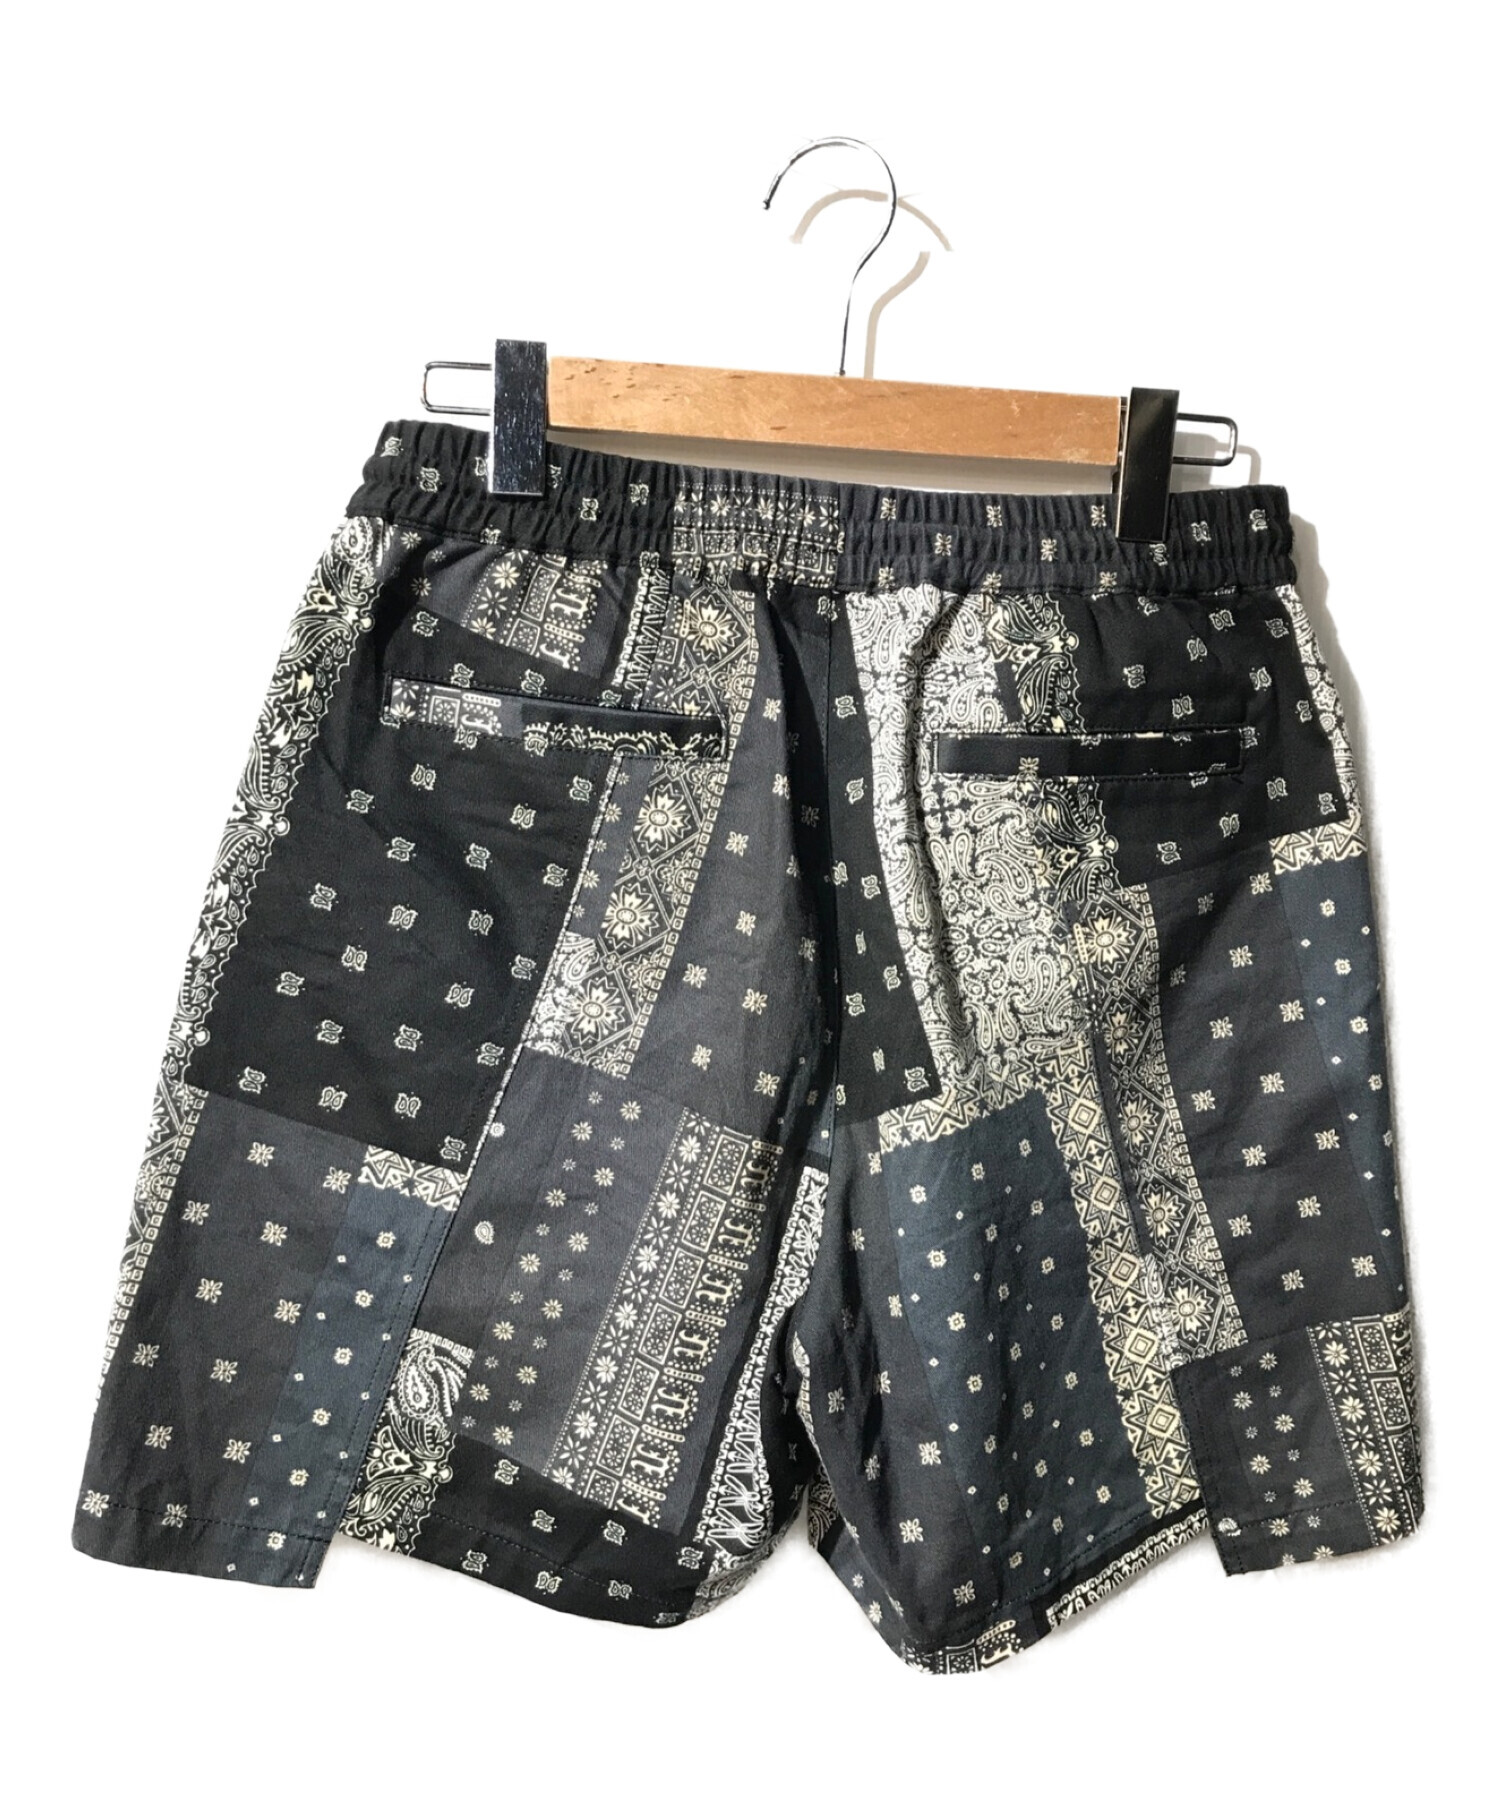 ALWAYS OUT OF STOCK PAISLEY SHORTS - resumeboost.io